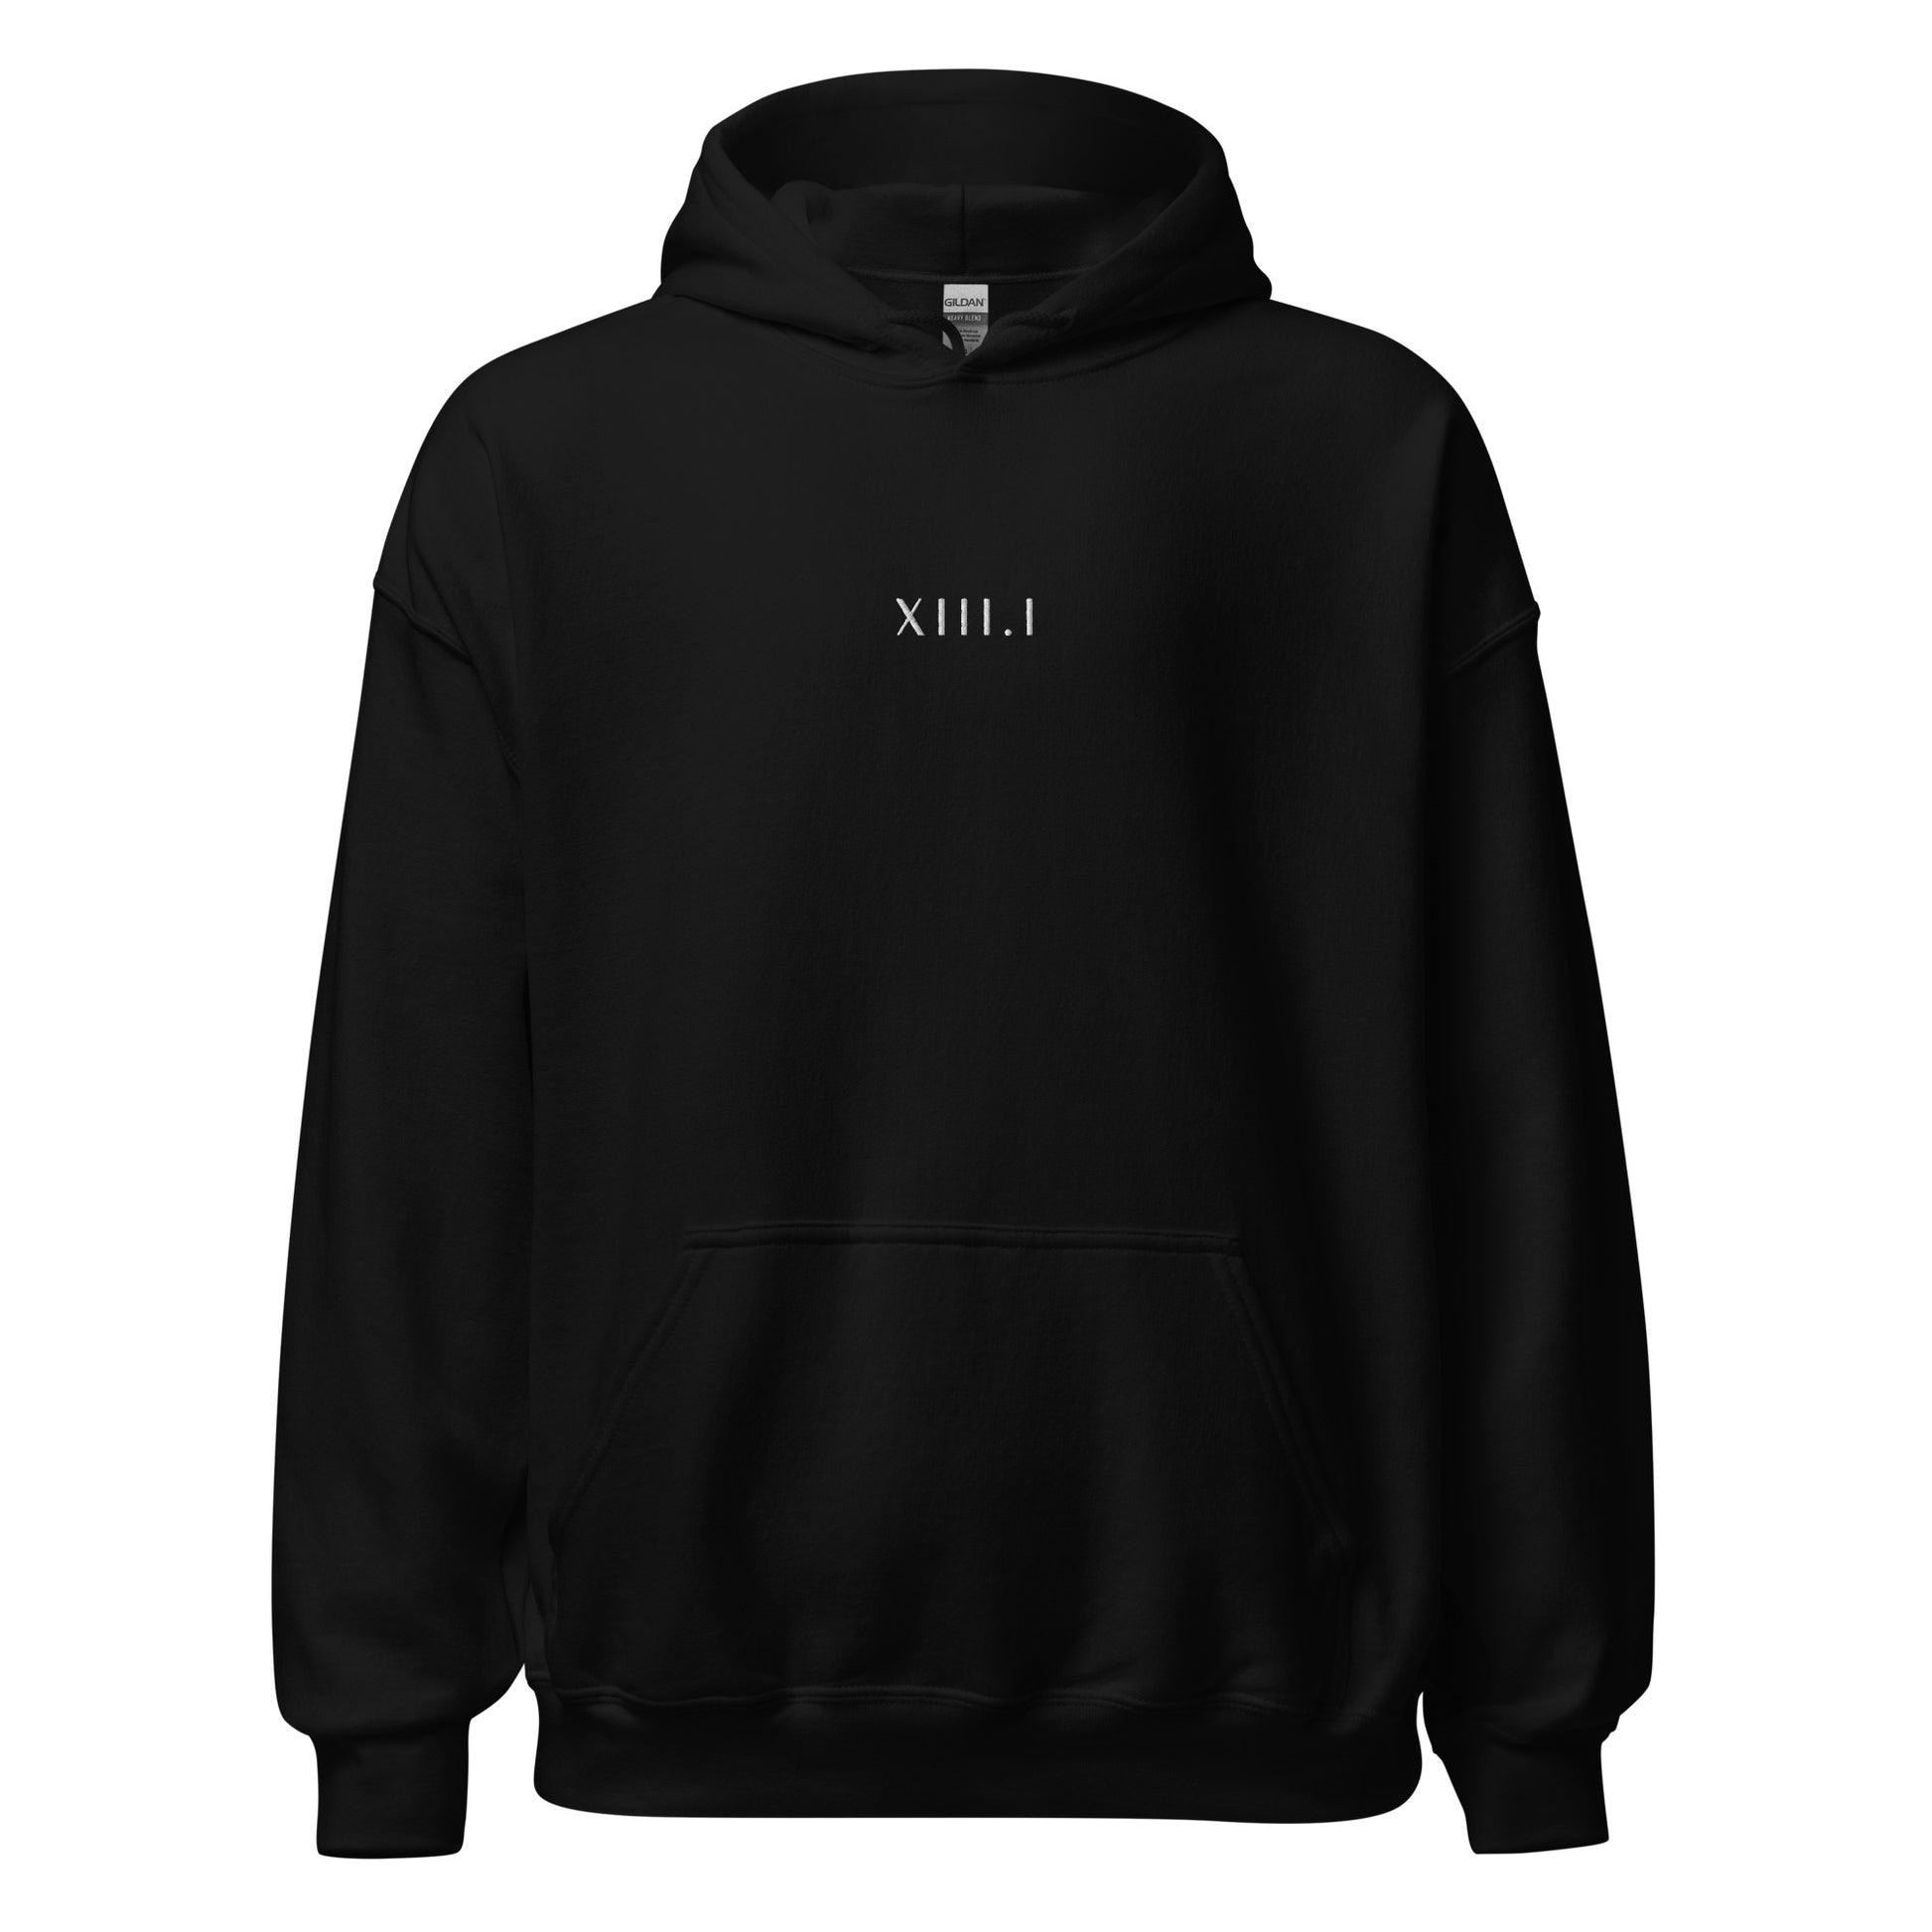 black unisex hoodie with XIII.I 13.1 half marathon in roman numerals embroidered in white writing